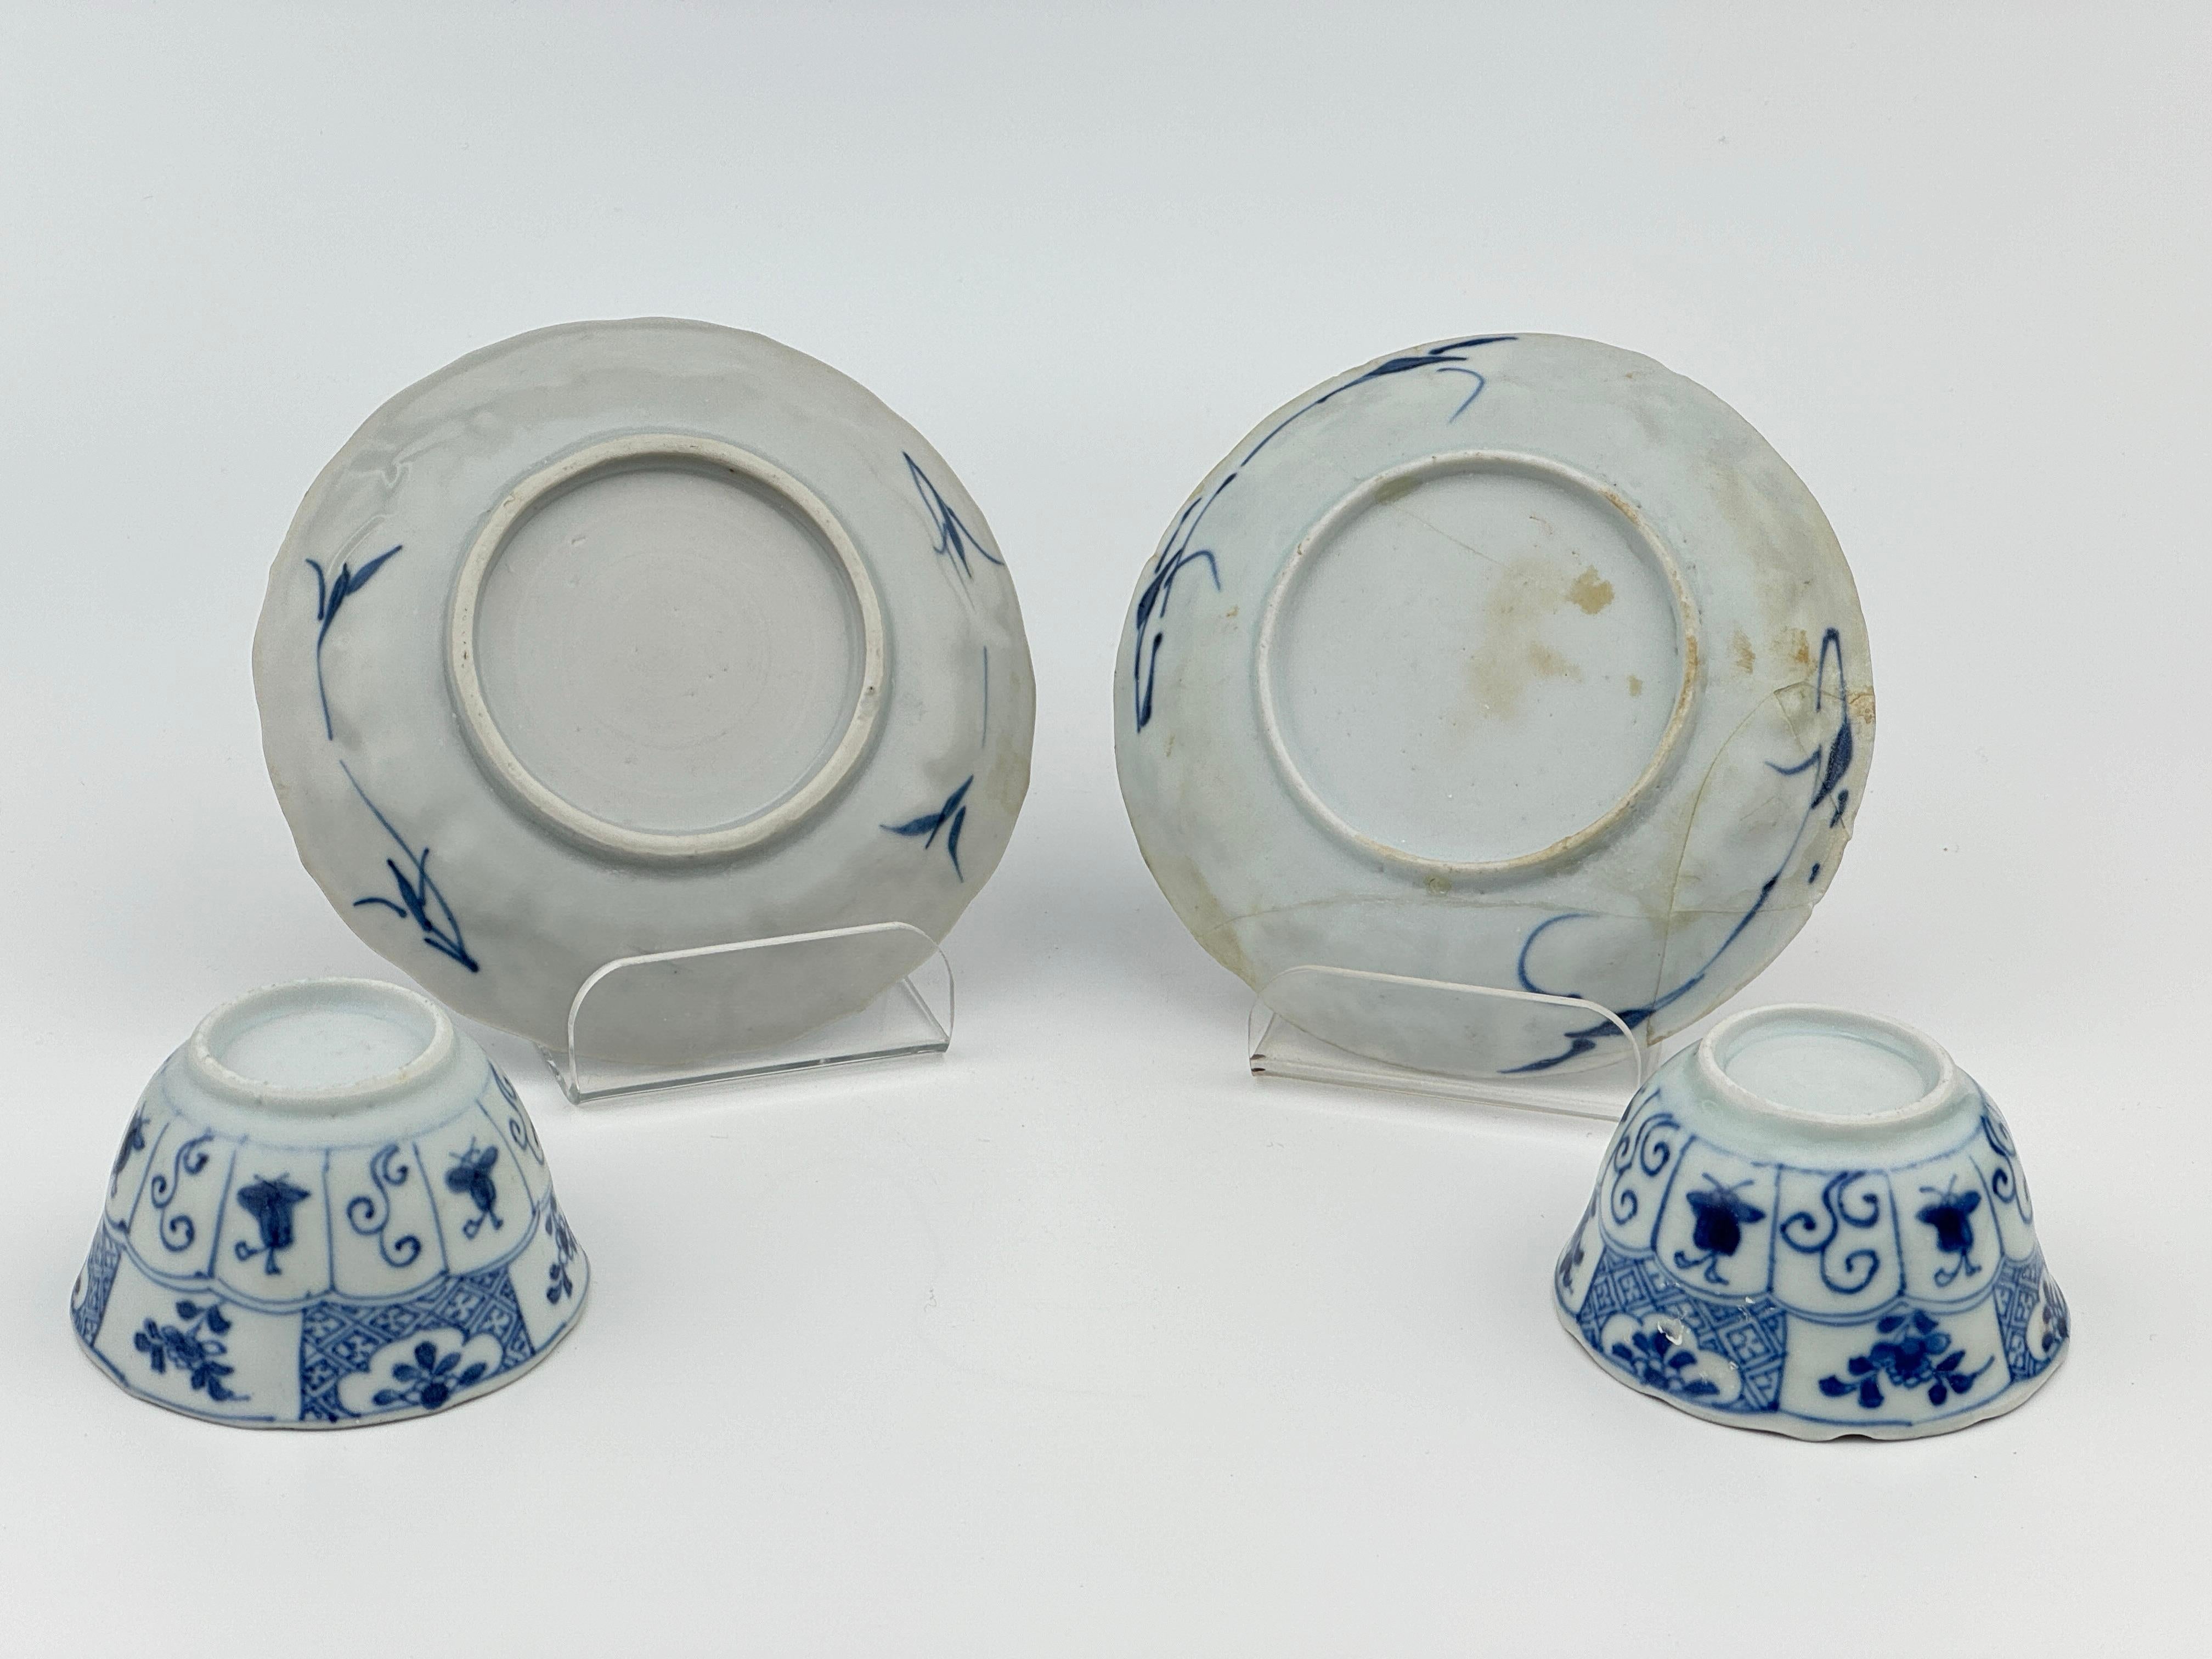 Ceramic Blue and white tea set c 1725, Qing dynasty, Yongzheng reign For Sale